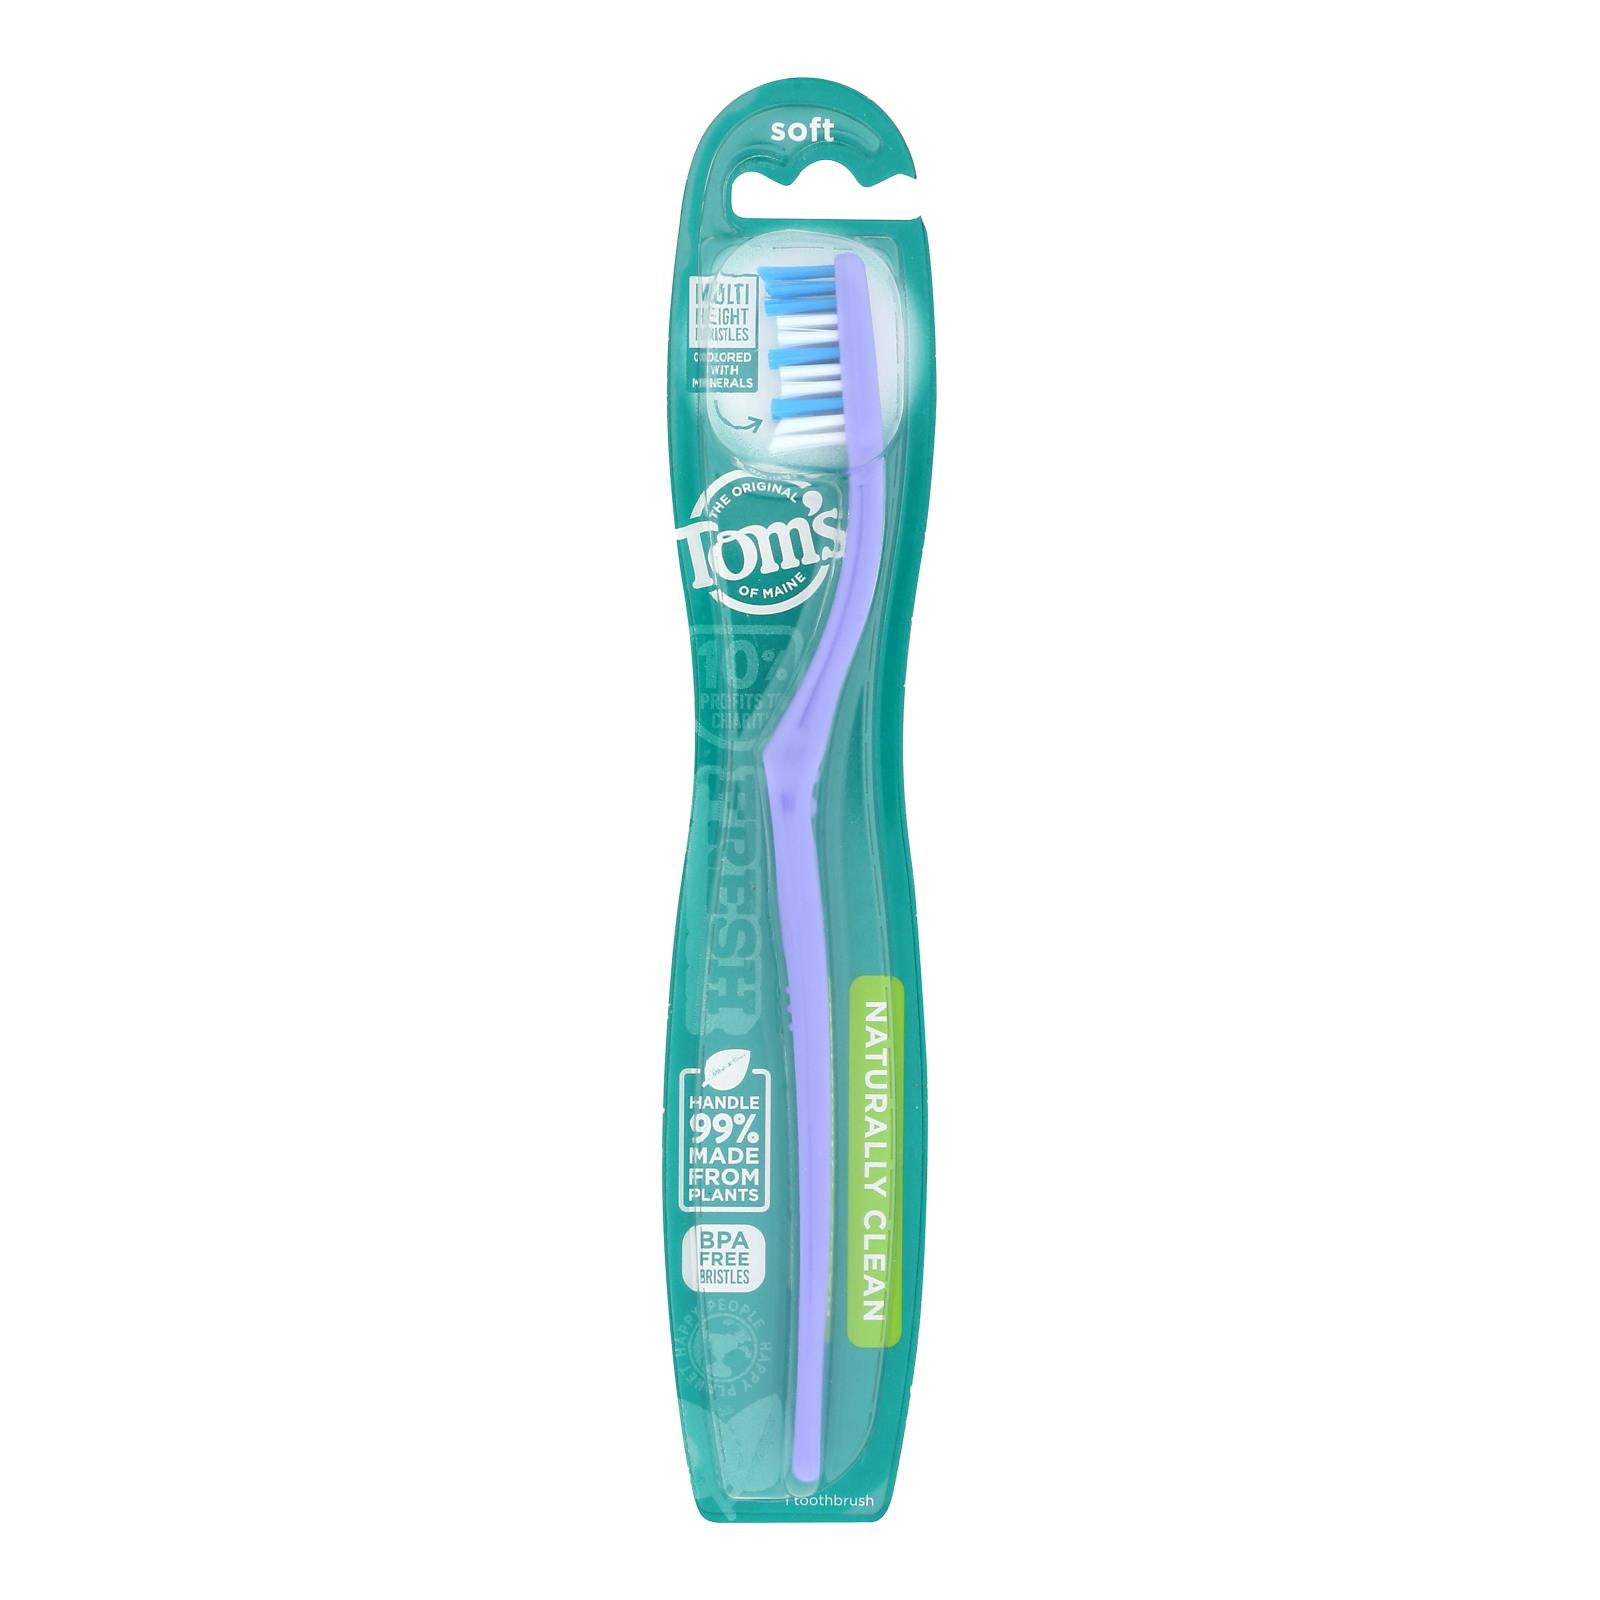 Tom's Of Maine Adult Toothbrush - Soft - Case Of 6